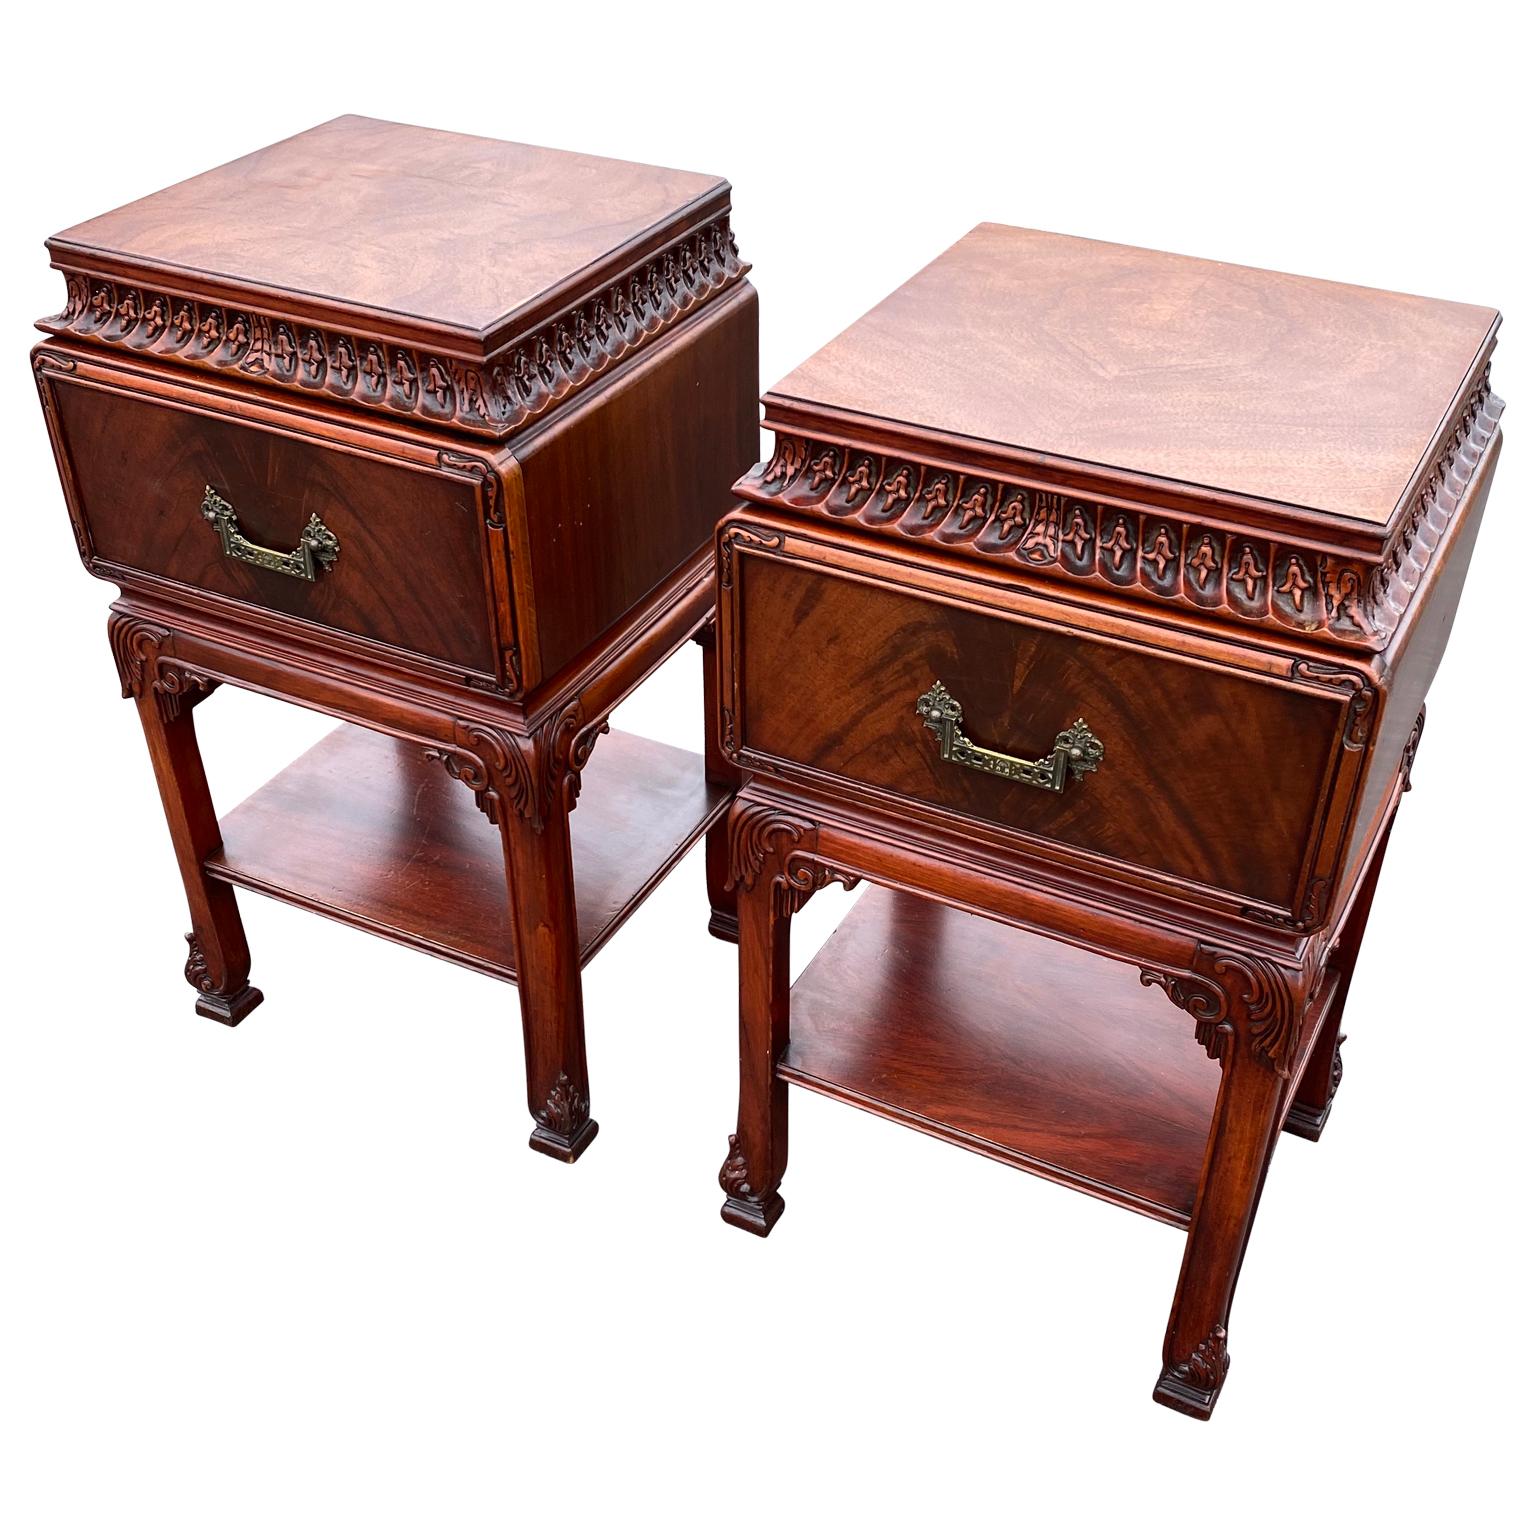 Pair Of Solid Rosewood Chinese Chippendale Nightstands Tables

